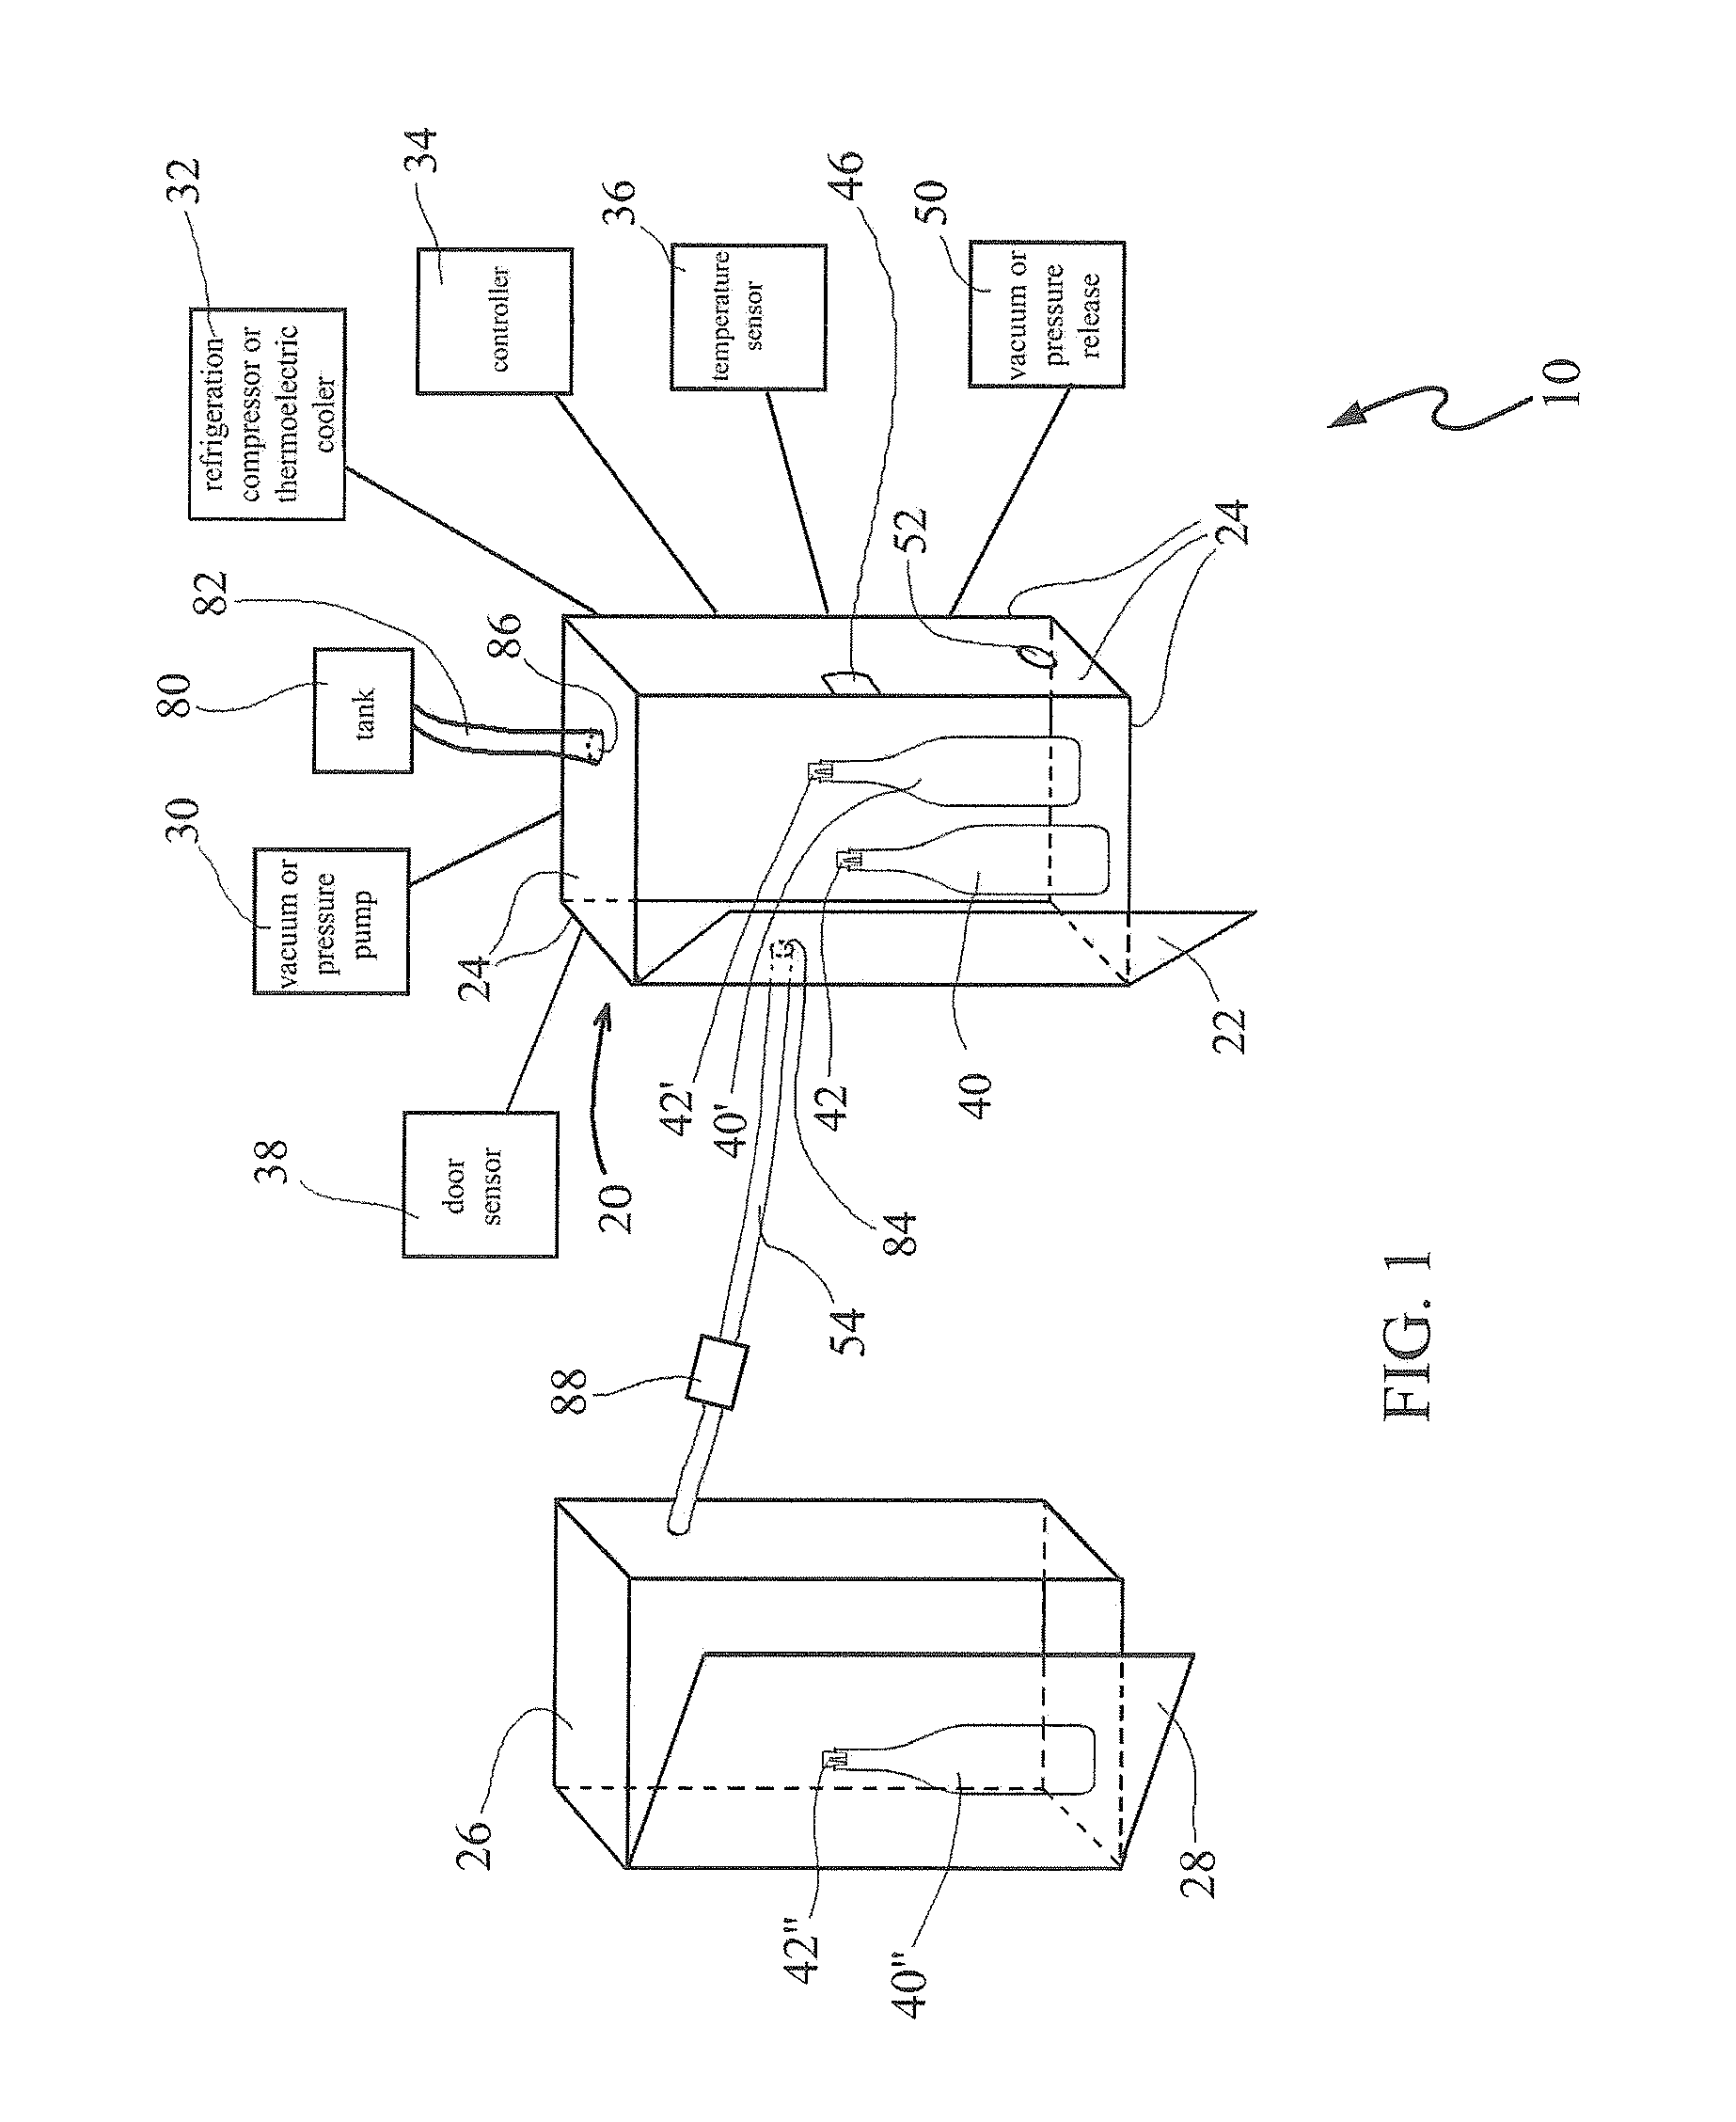 Vacuum or pressure storage system for food or beverage containers